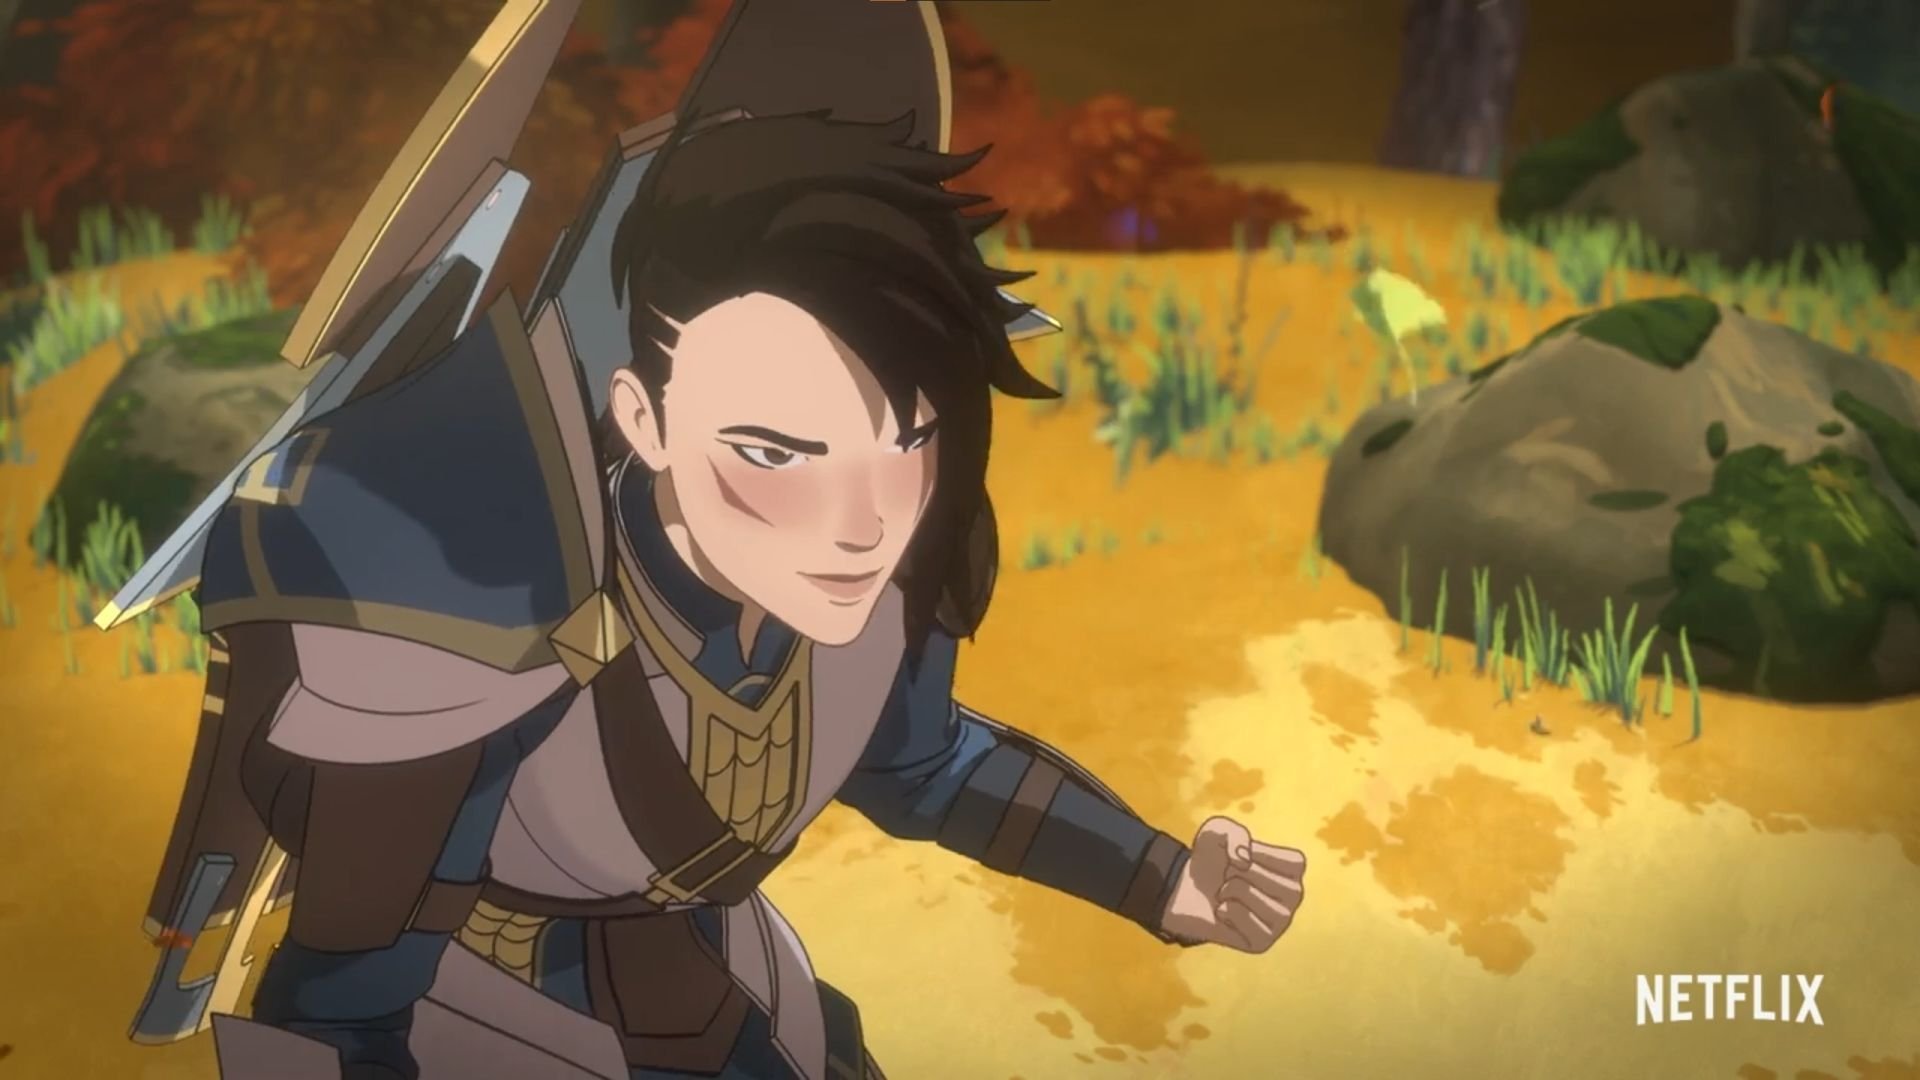 Watch Amaya Be a BAMF in New Clip from Season 4 of THE DRAGON PRINCE